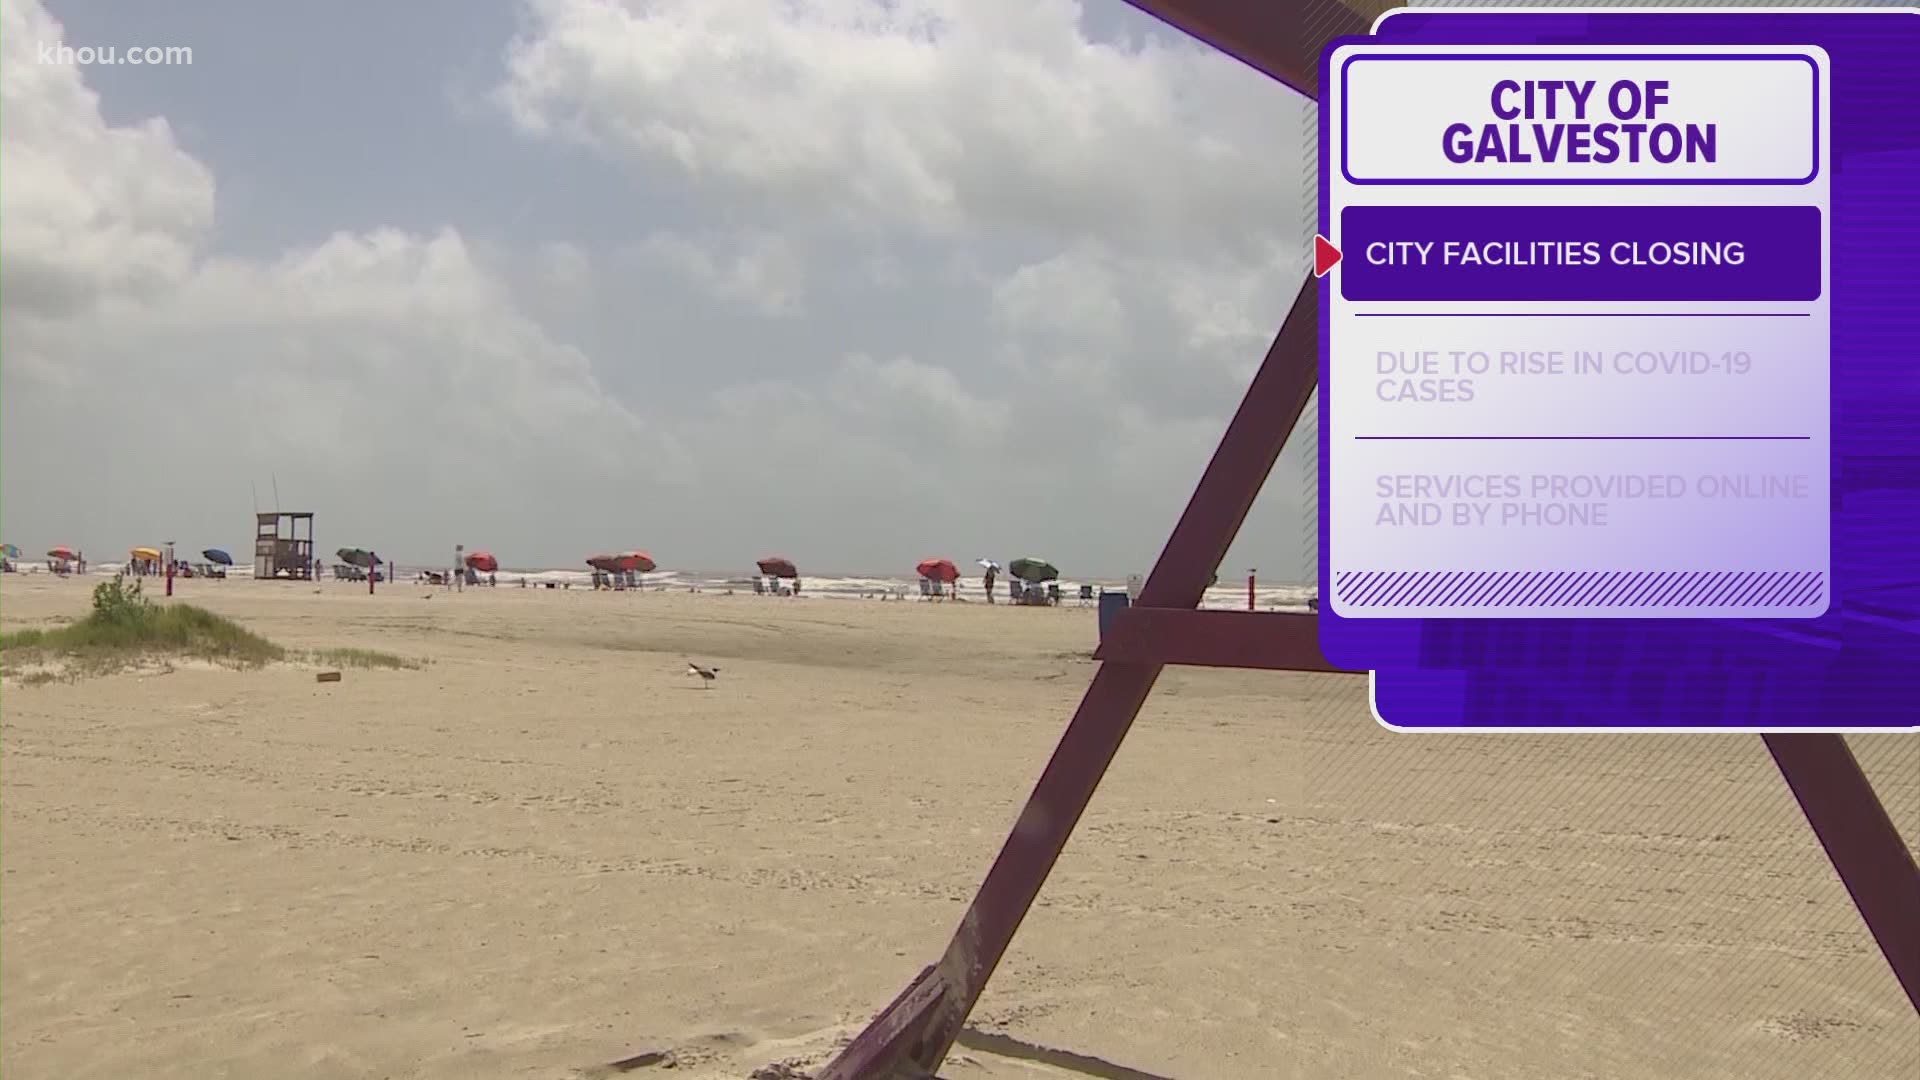 City of Galveston said closures begin Tuesday in response to the recent surge of coronavirus cases in the area.